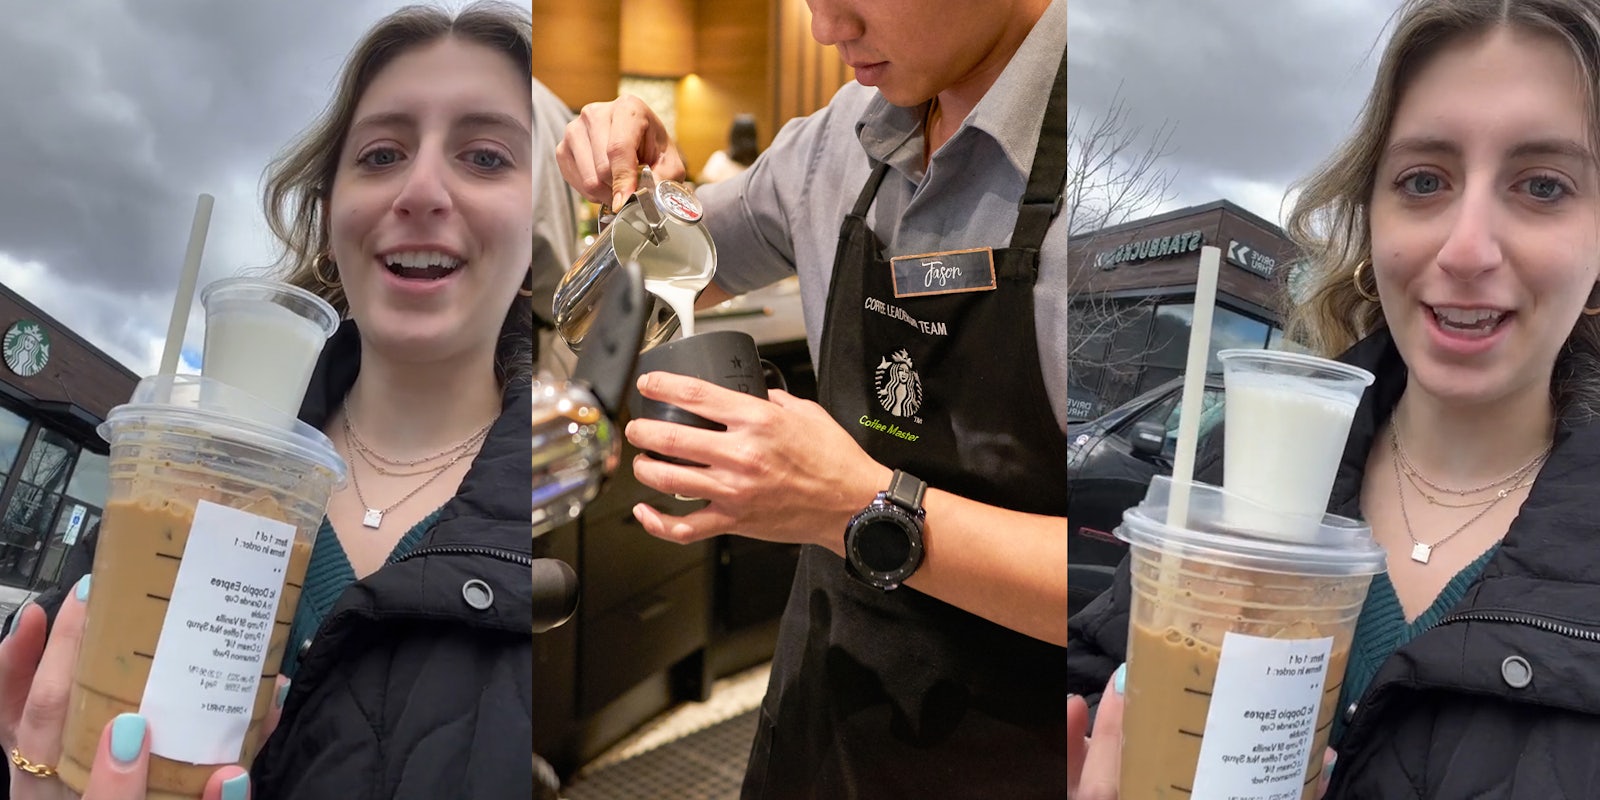 woman holding a Starbucks drink with extra cream on top while speaking outside (l) Starbucks barista pouring cream into mug (c) woman holding a Starbucks drink with extra cream on top while speaking outside (r)